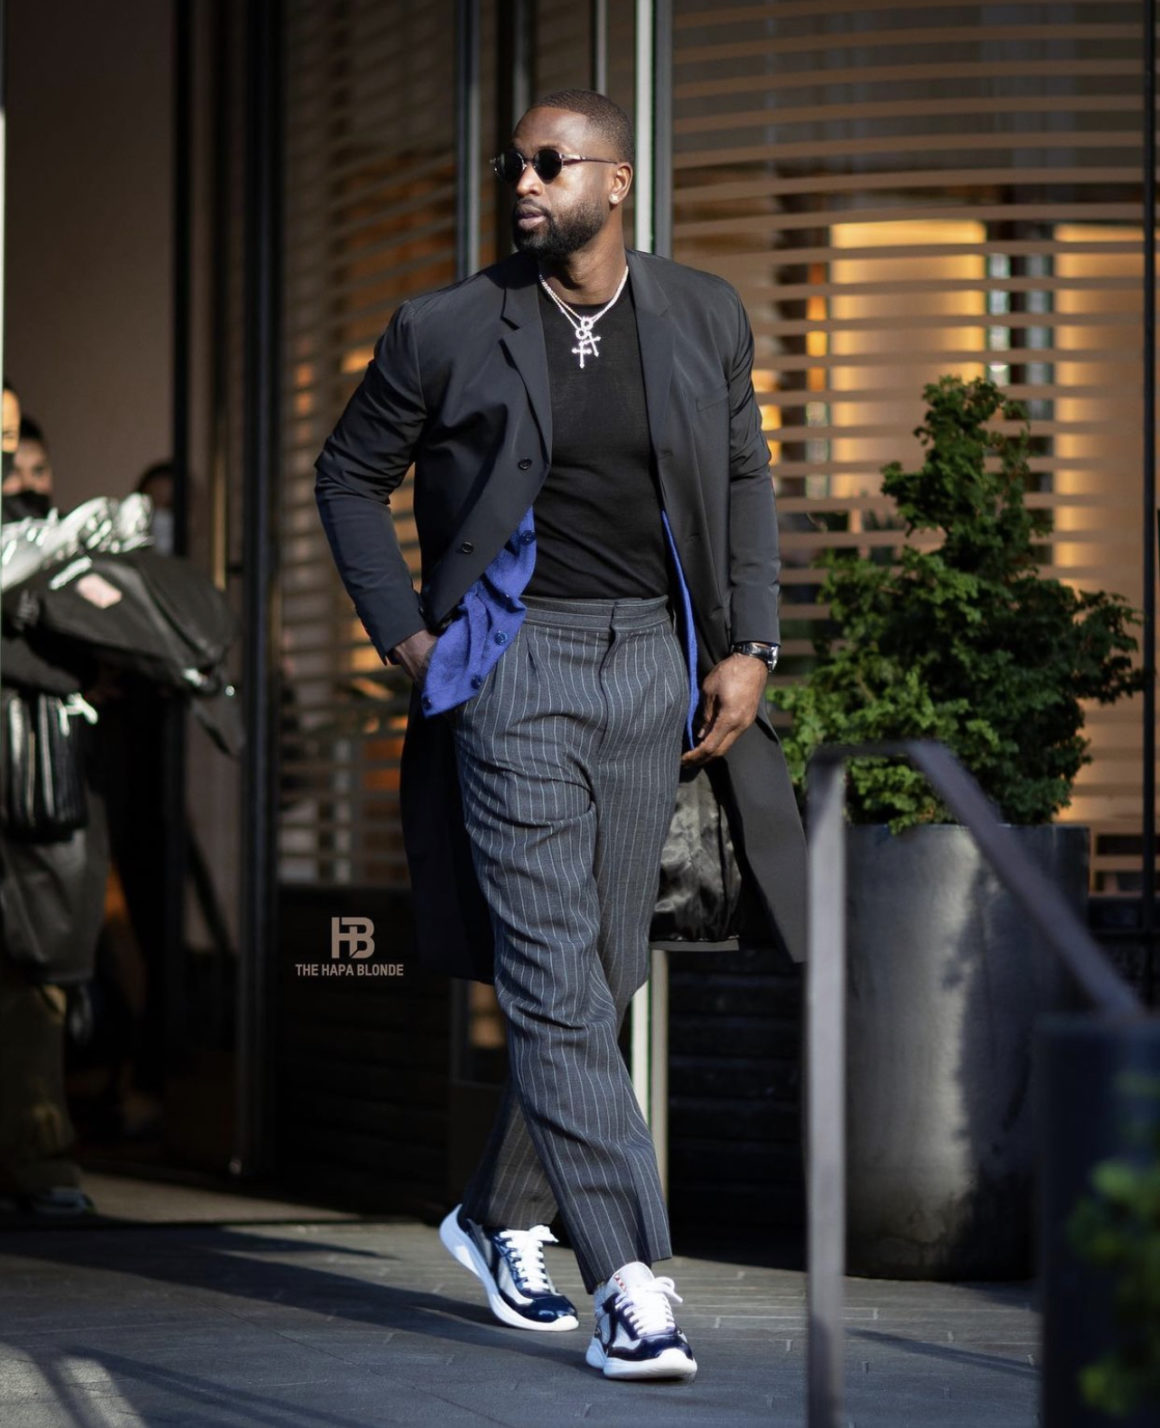 Best of 2020: Most Fashionable Man Including Dwyane Wade, Drake, Steve  Harvey and More! – Fashion Bomb Daily